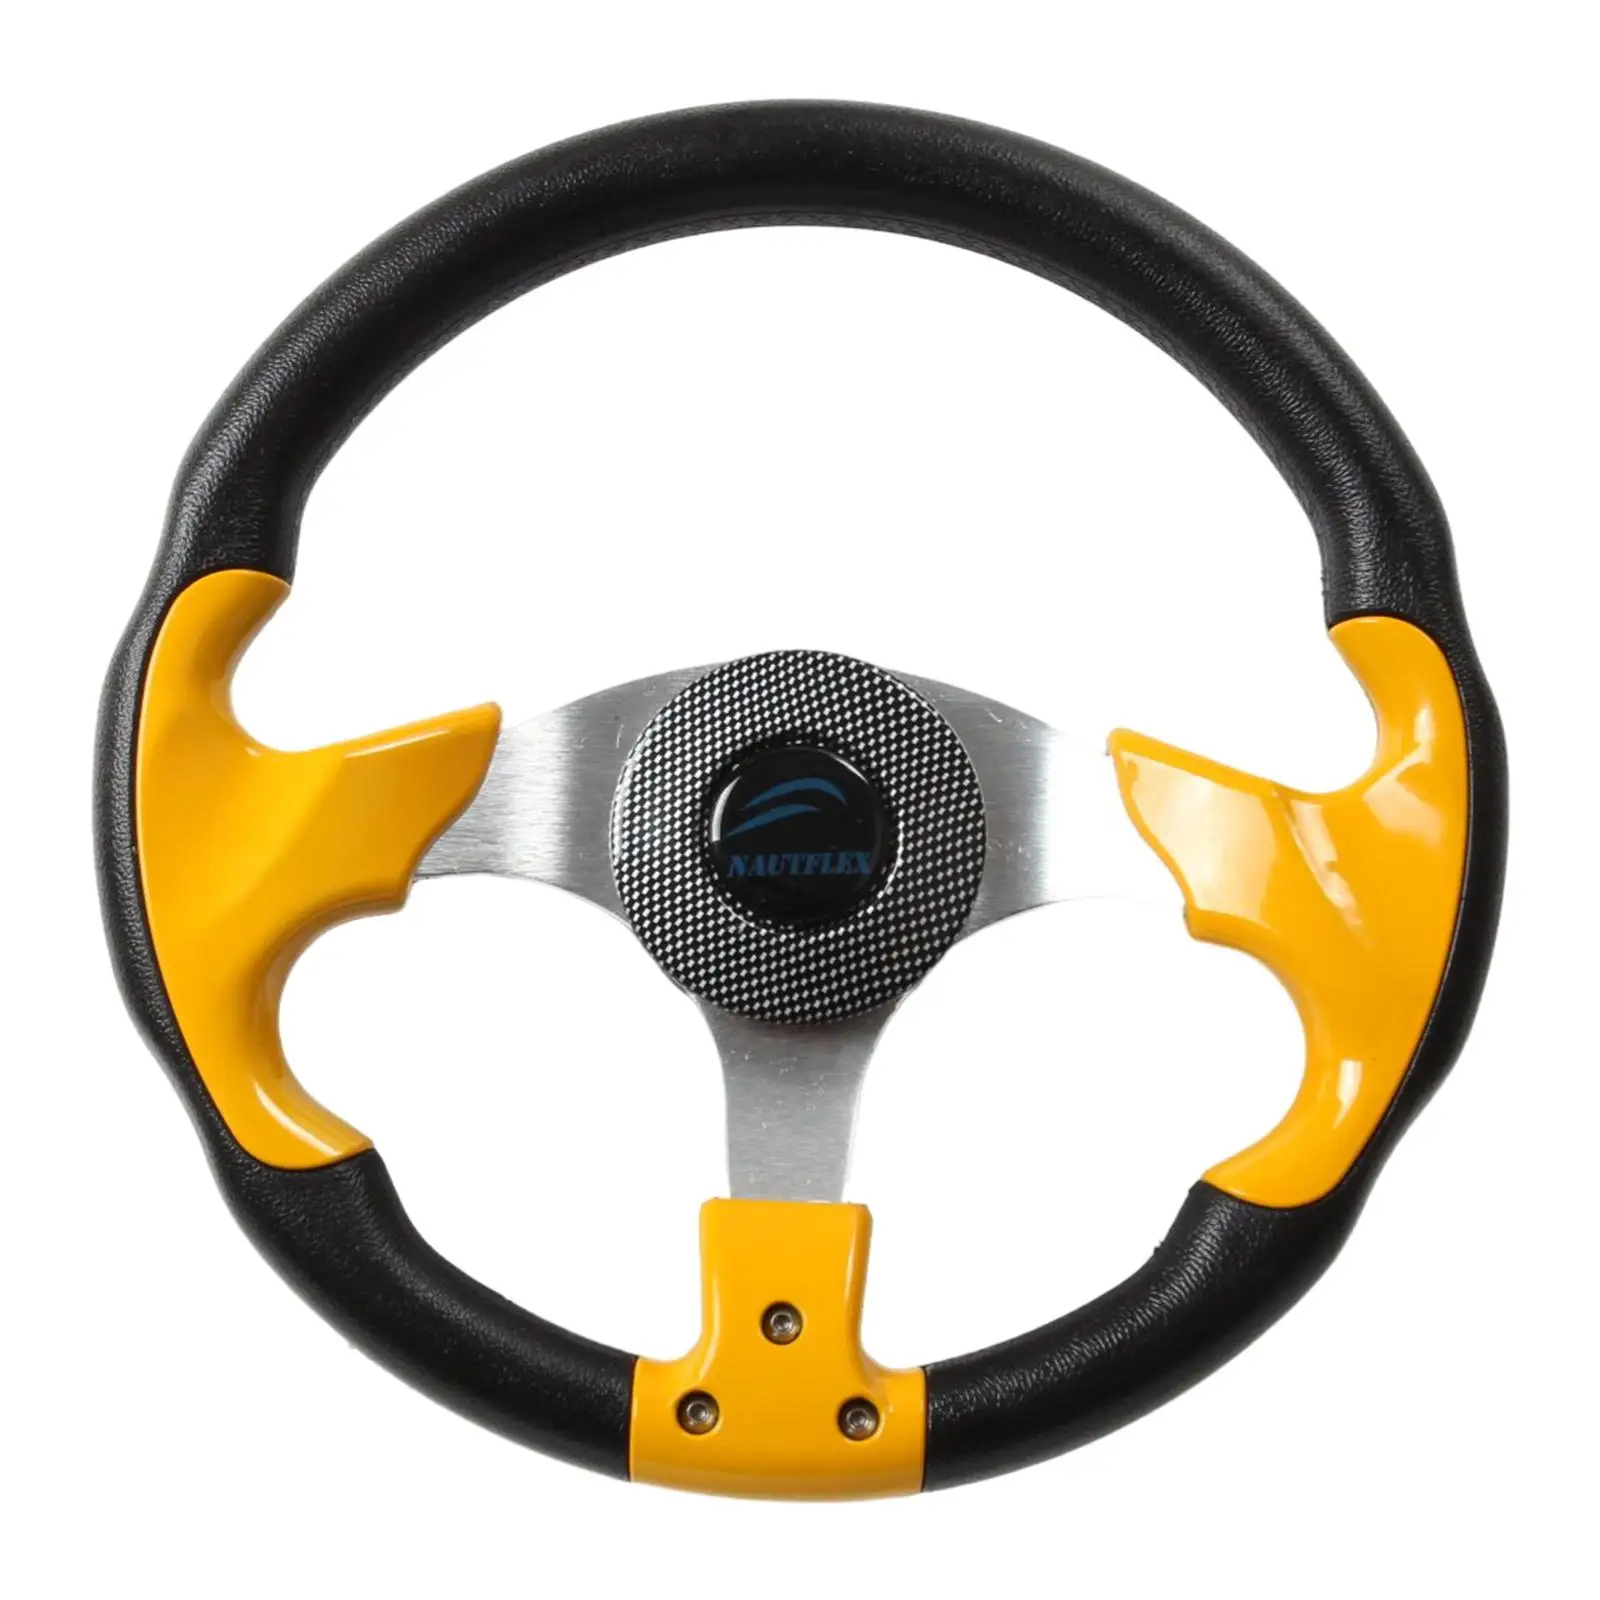 Boat Steering Wheel 19mm Tapered Shaft 3 Spoke Replacement 320  Yellow Non directional for Boat Accessories Marine Vessels